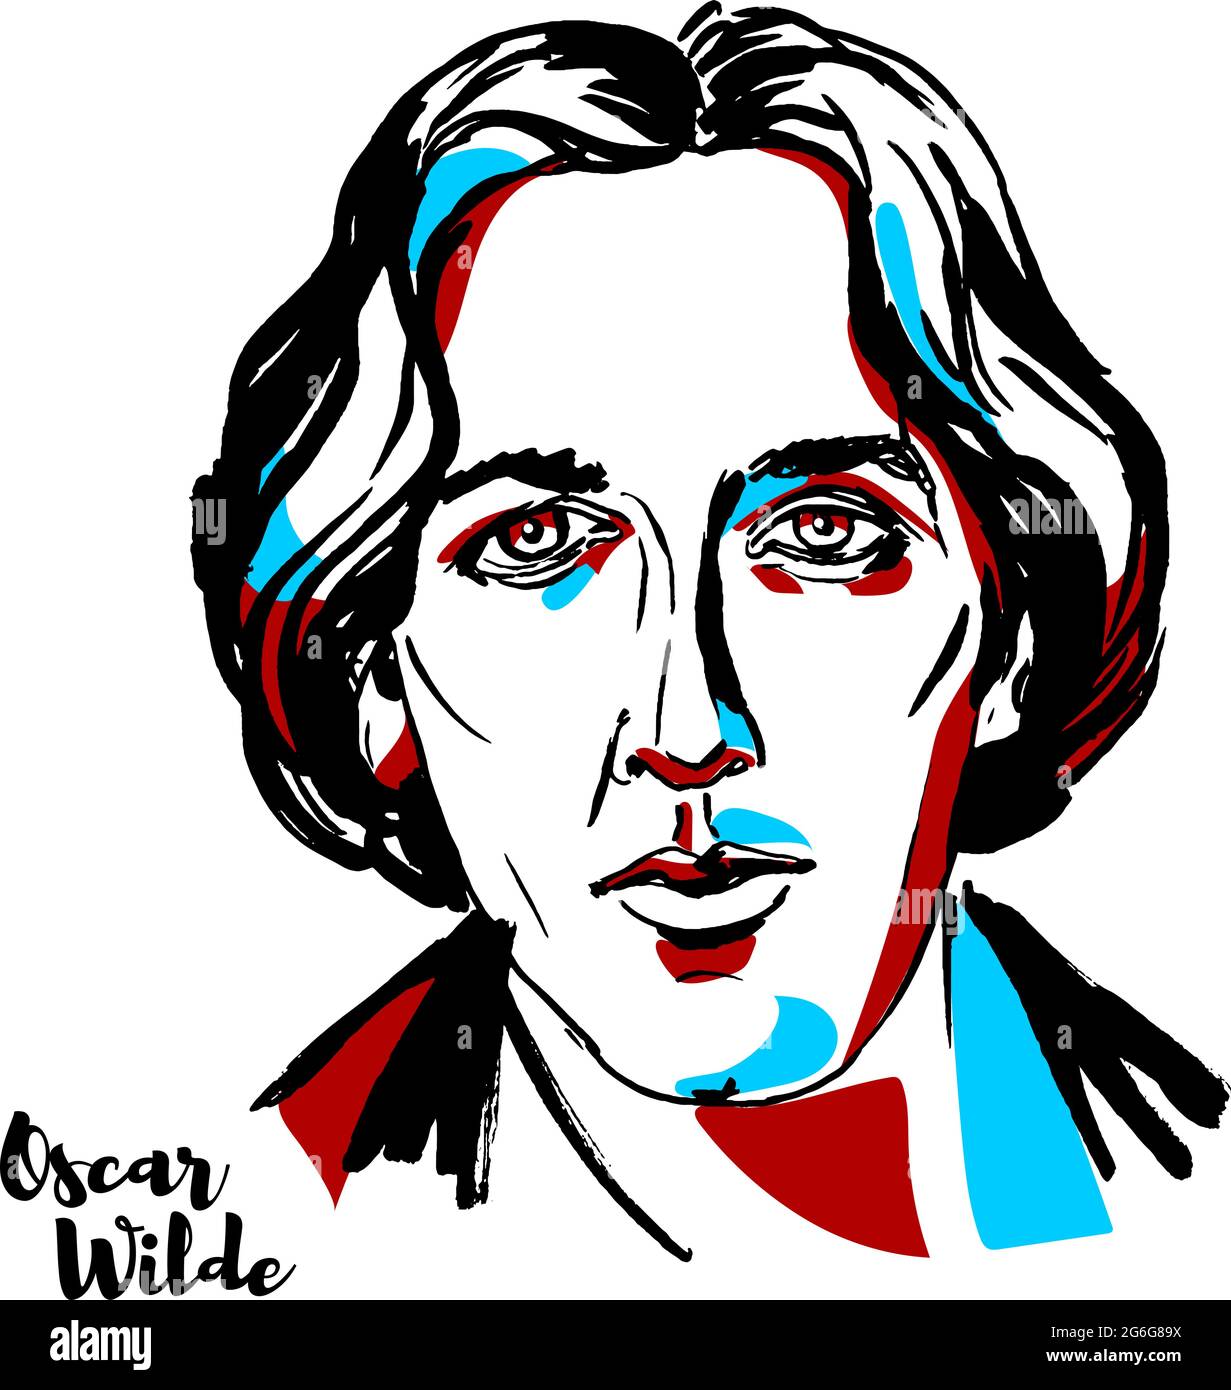 MOSCOW, RUSSIA - AUGUST 21, 2018: Oscar Wilde engraved vector portrait with ink contours. Irish poet and playwright. Stock Vector